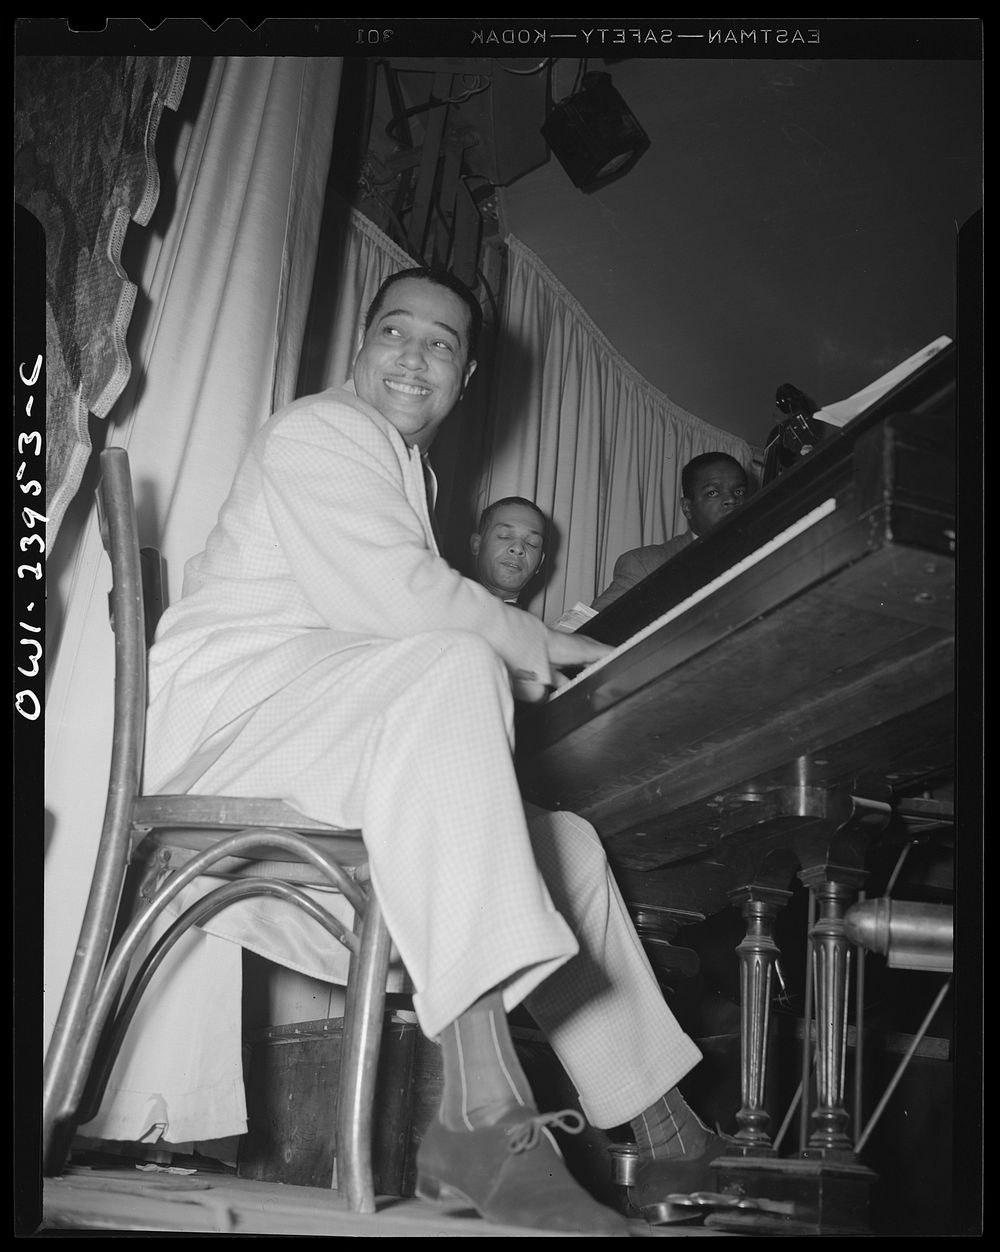 New York, New York. Duke Ellington, orchestra leader. Sourced from the Library of Congress.